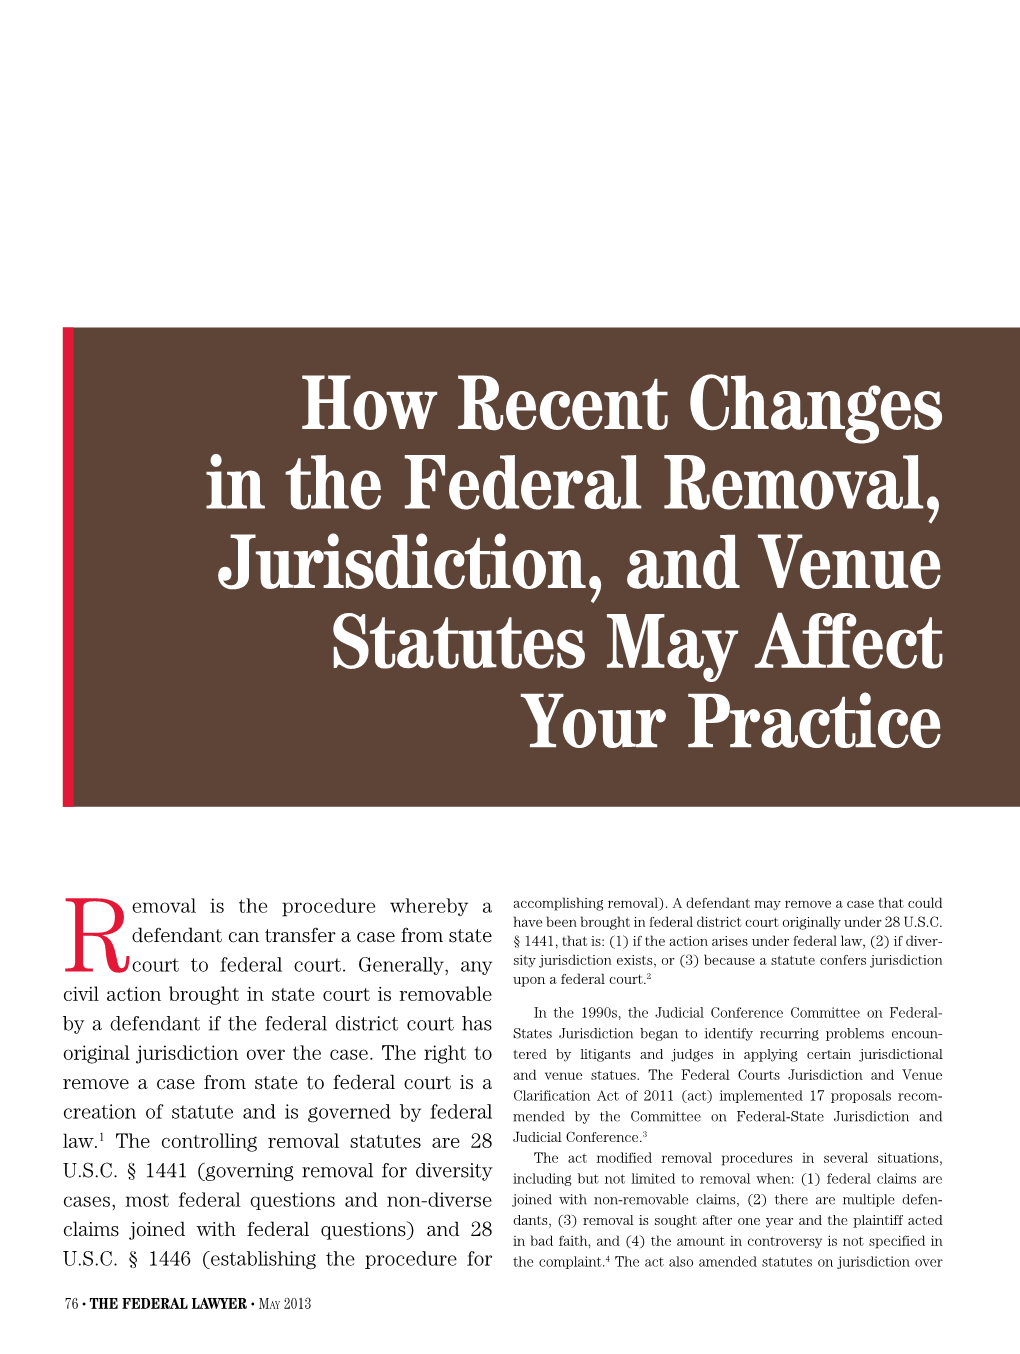 How Recent Changes in the Federal Removal, Jurisdiction, and Venue Statutes May Affect Your Practice